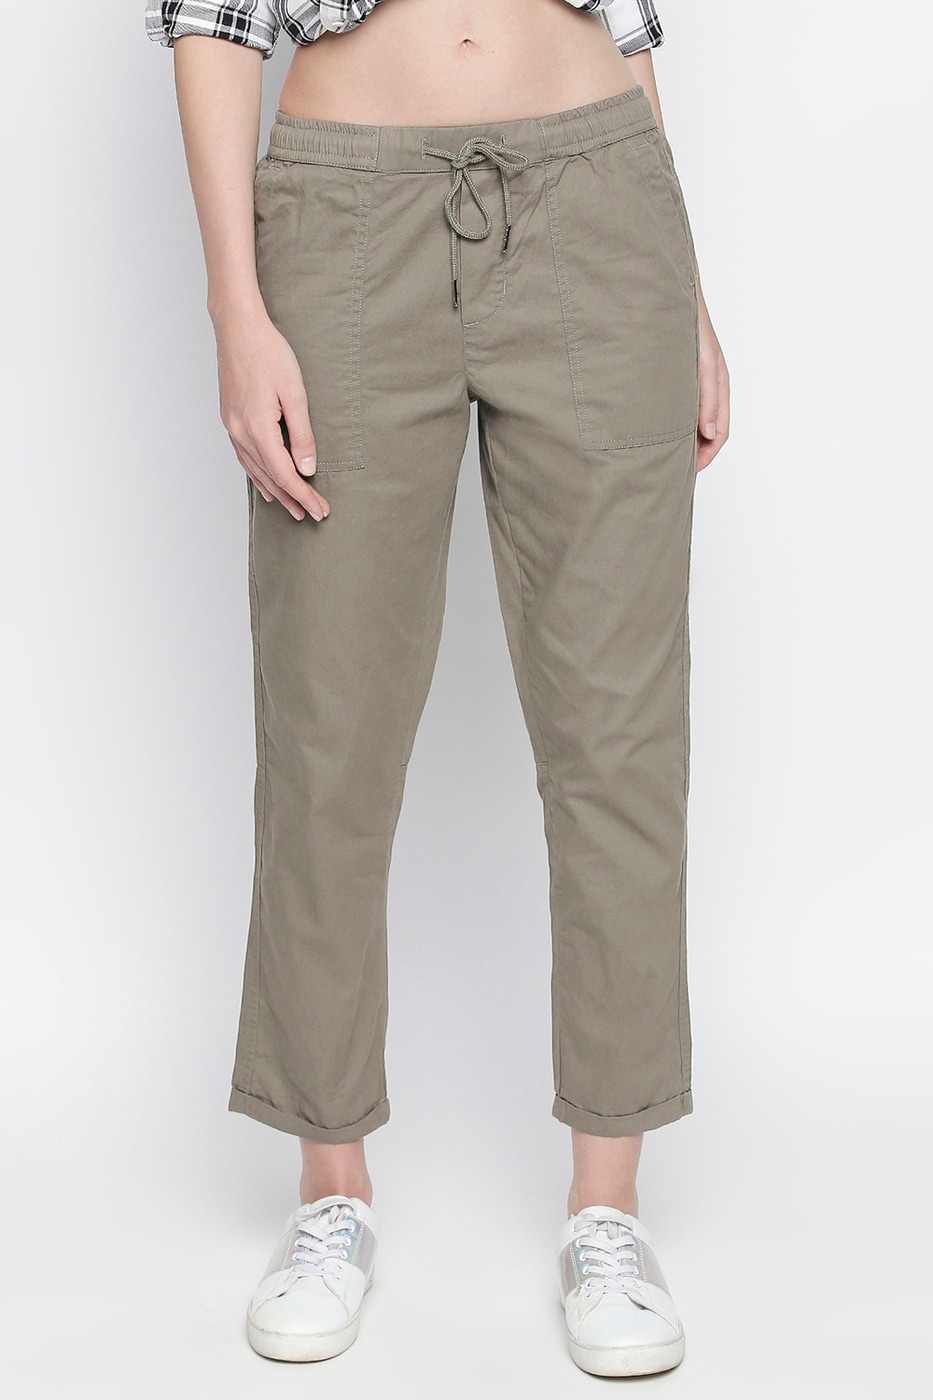 Buy Olive Green Trousers  Pants for Women by Honey by Pantaloons Online   Ajiocom